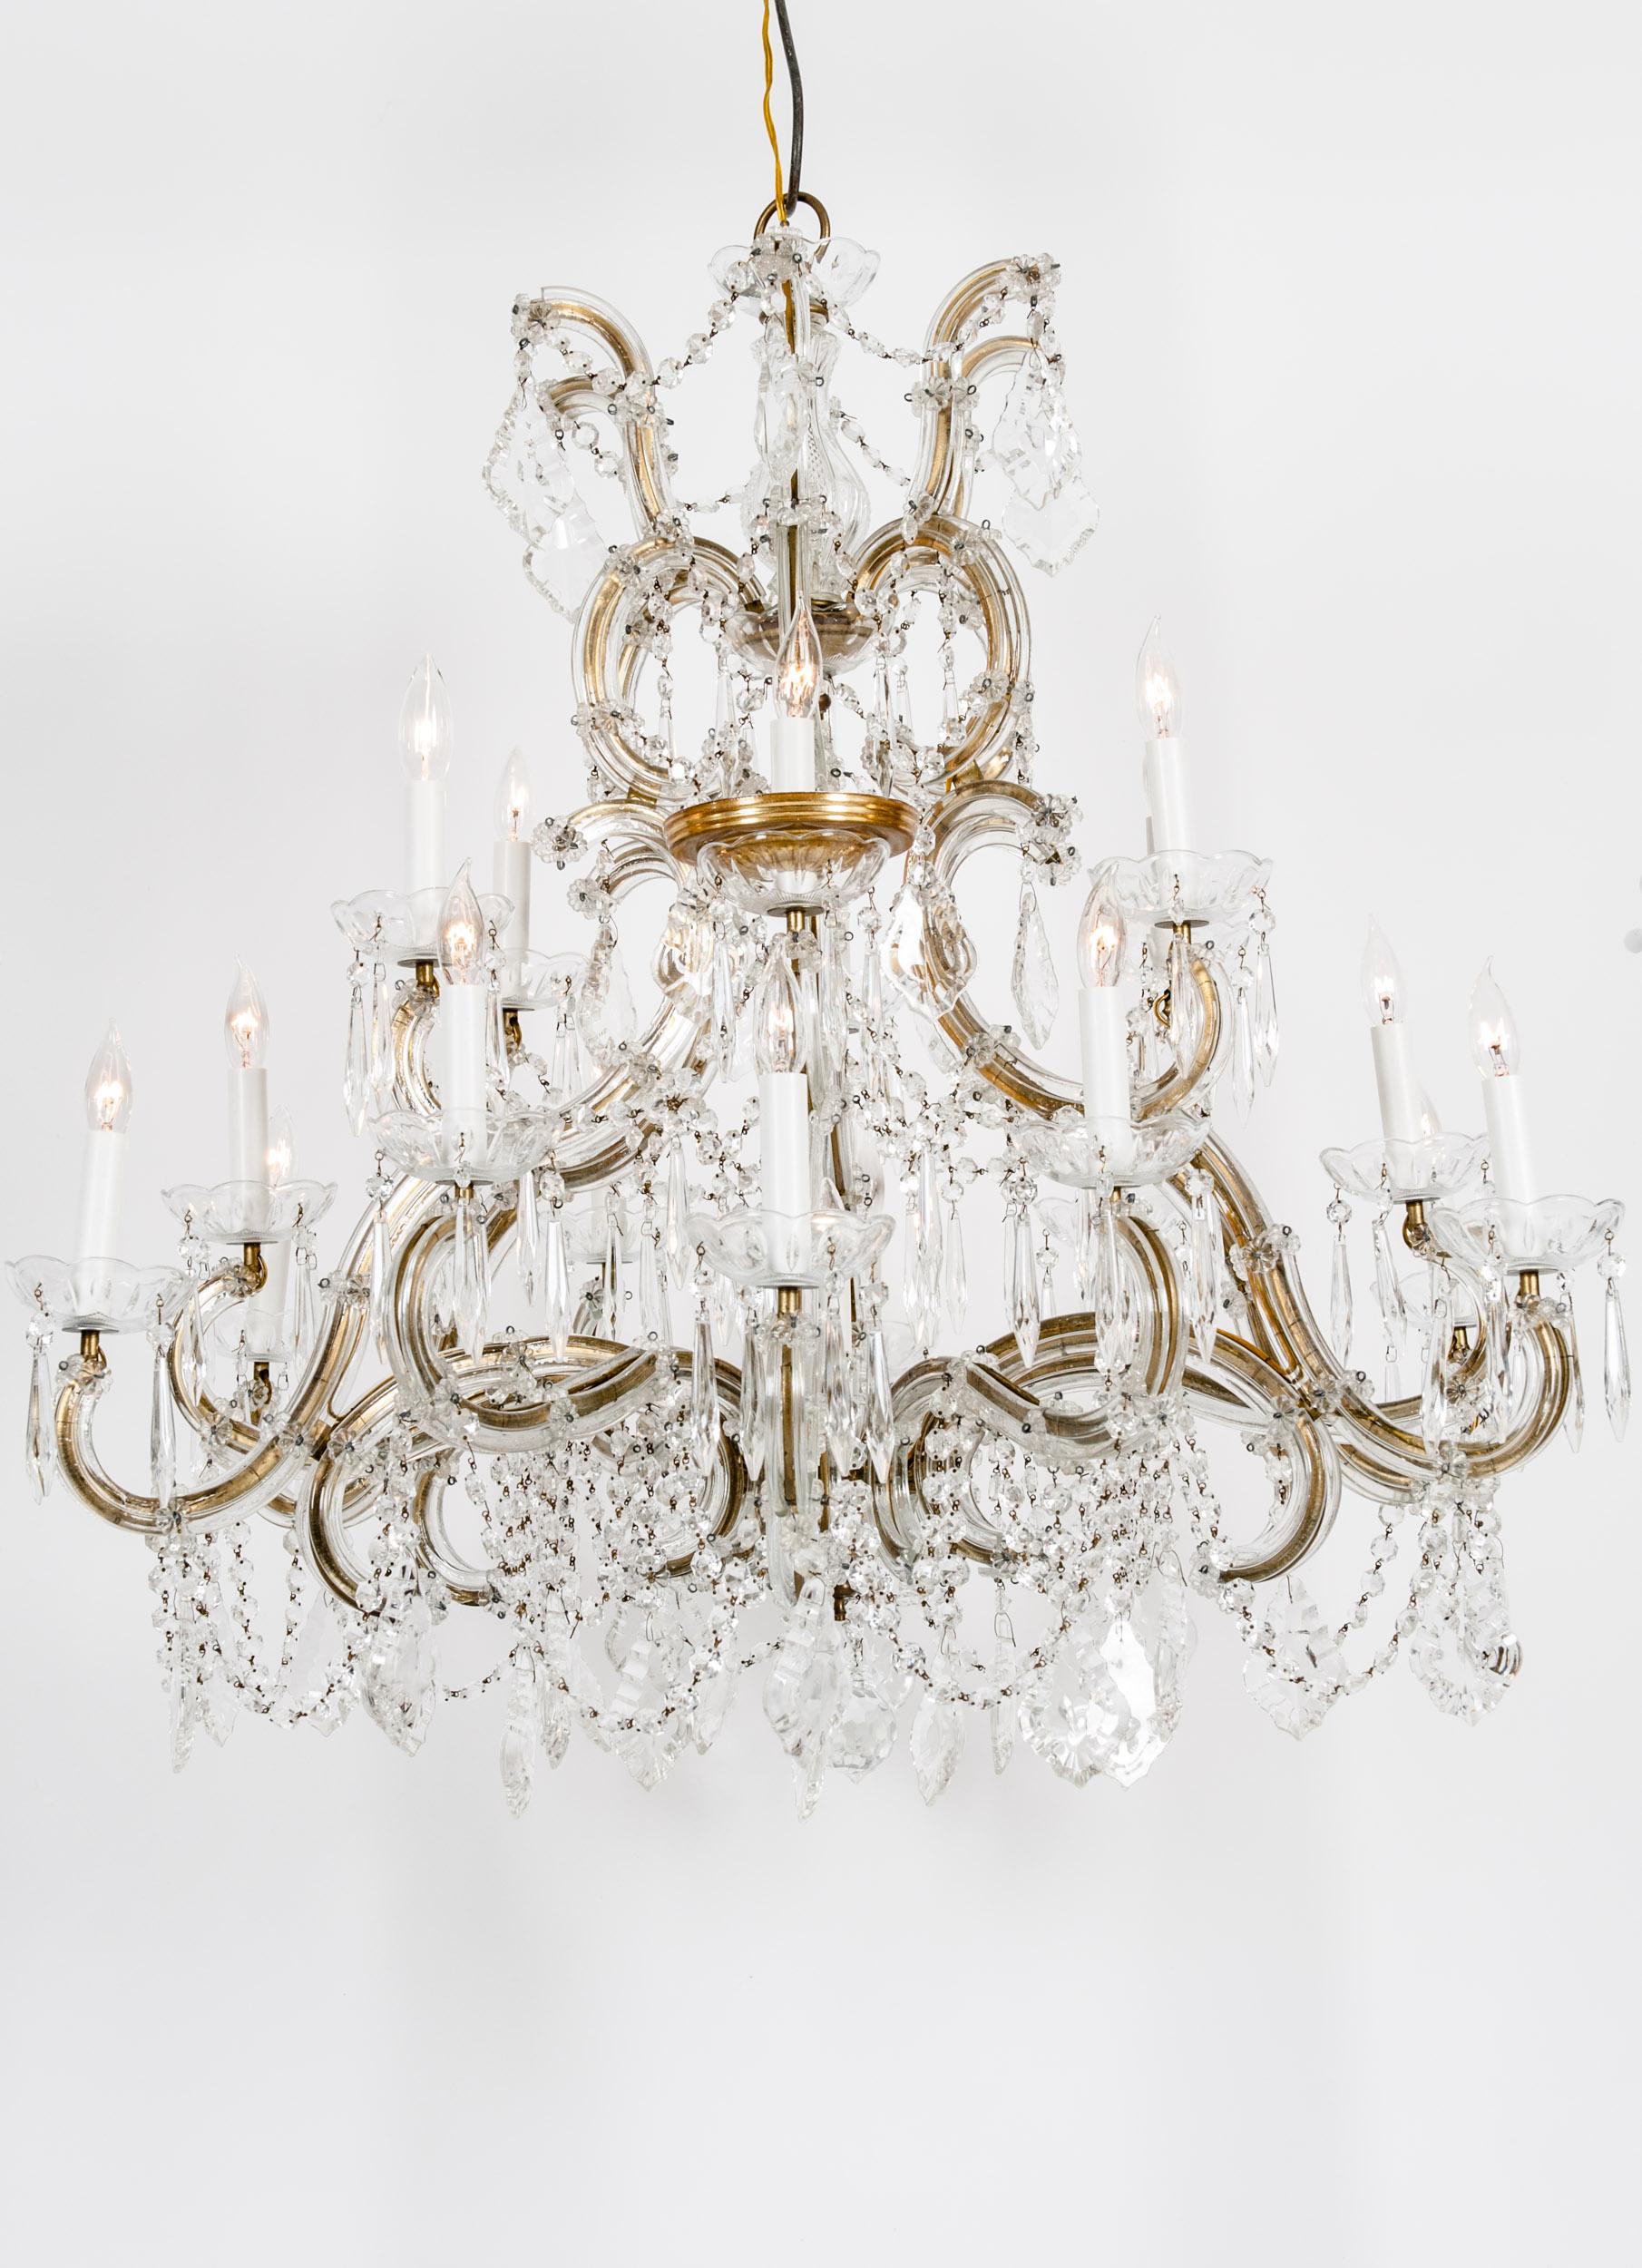 Late 19th century cut crystal 18-light North American hanging chandelier. The chandelier is in great working condition recently rewired. Minor wear consistent with age / use. The chandelier measure about 36 inches length X 38 inches diameter.